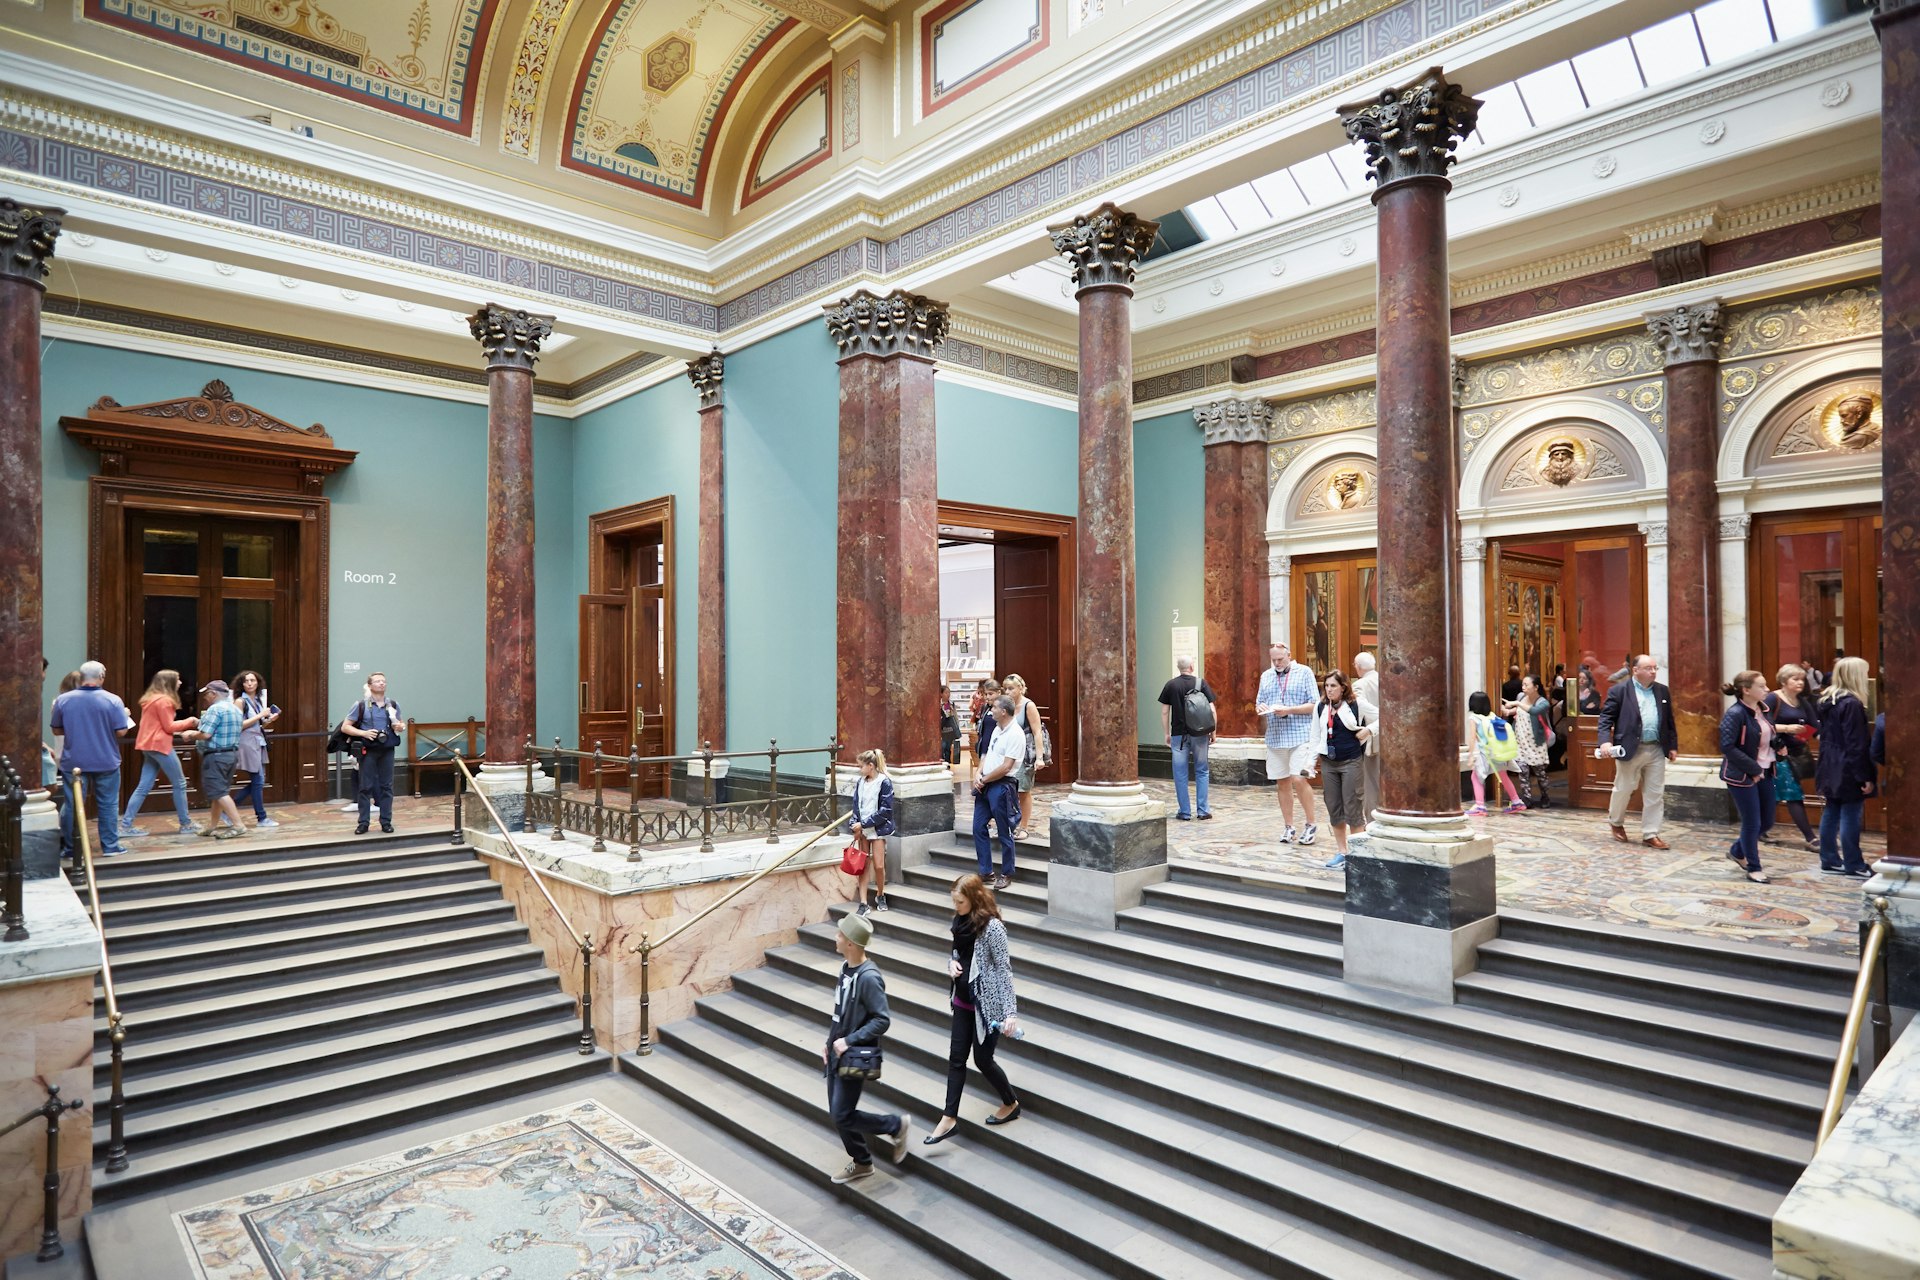 Visitors in the National Gallery interior with columns, stairways on August 6, 2015 in London, UK. The museum was founded in 1824 and hosts a collection of over 2300 paintings